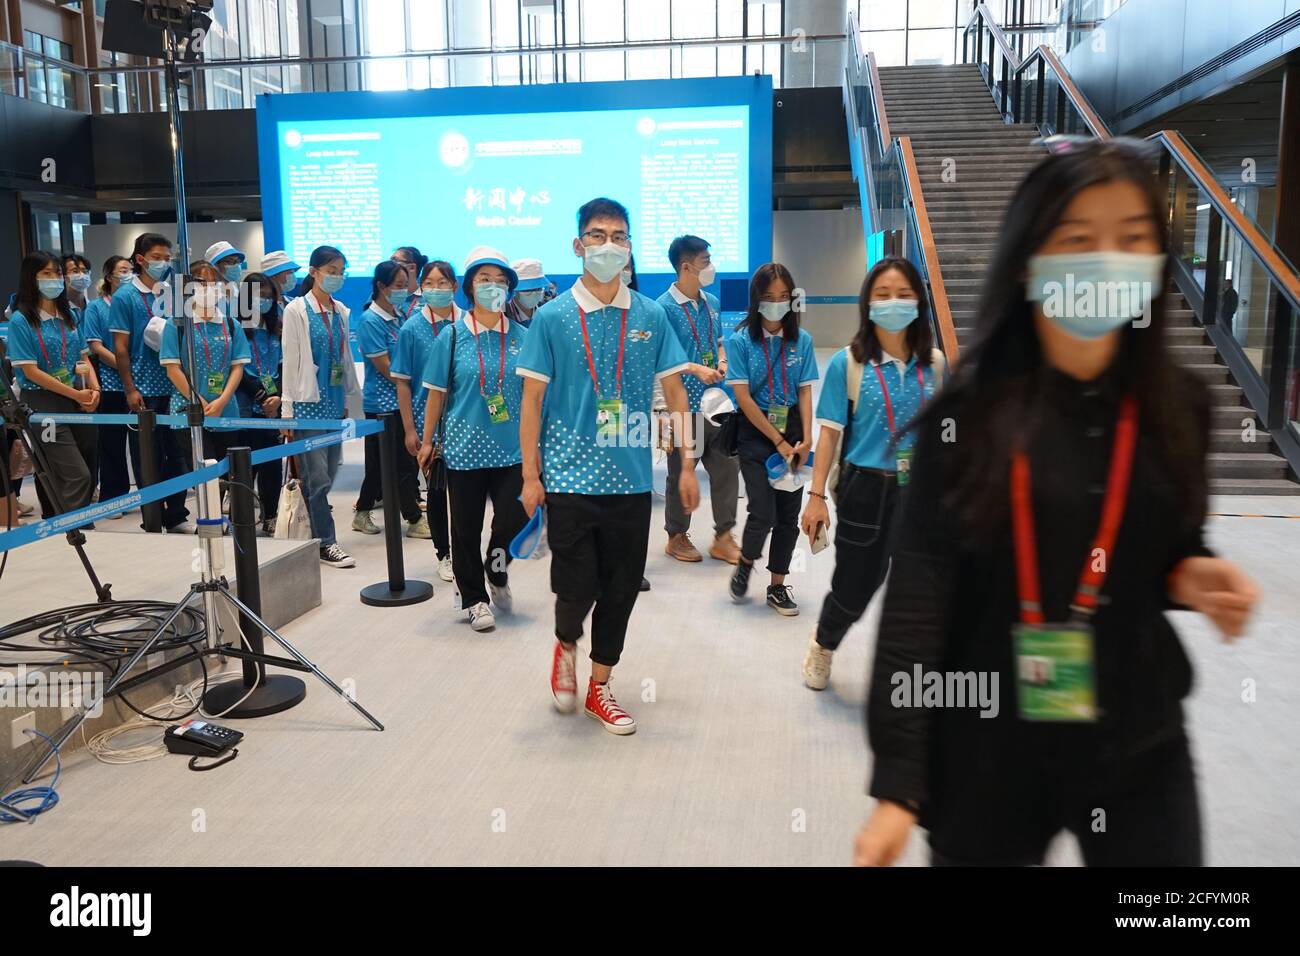 Beijing, China. 3rd Sep, 2020. Volunteers wearing masks visit the media center of the 2020 China International Fair for Trade in Services (CIFTIS) in Beijing, capital of China, Sept. 3, 2020. The 2020 CIFTIS is the first major international economic and trade event held both online and offline by China since the COVID-19 outbreak. Credit: Zheng Yue/Xinhua/Alamy Live News Stock Photo